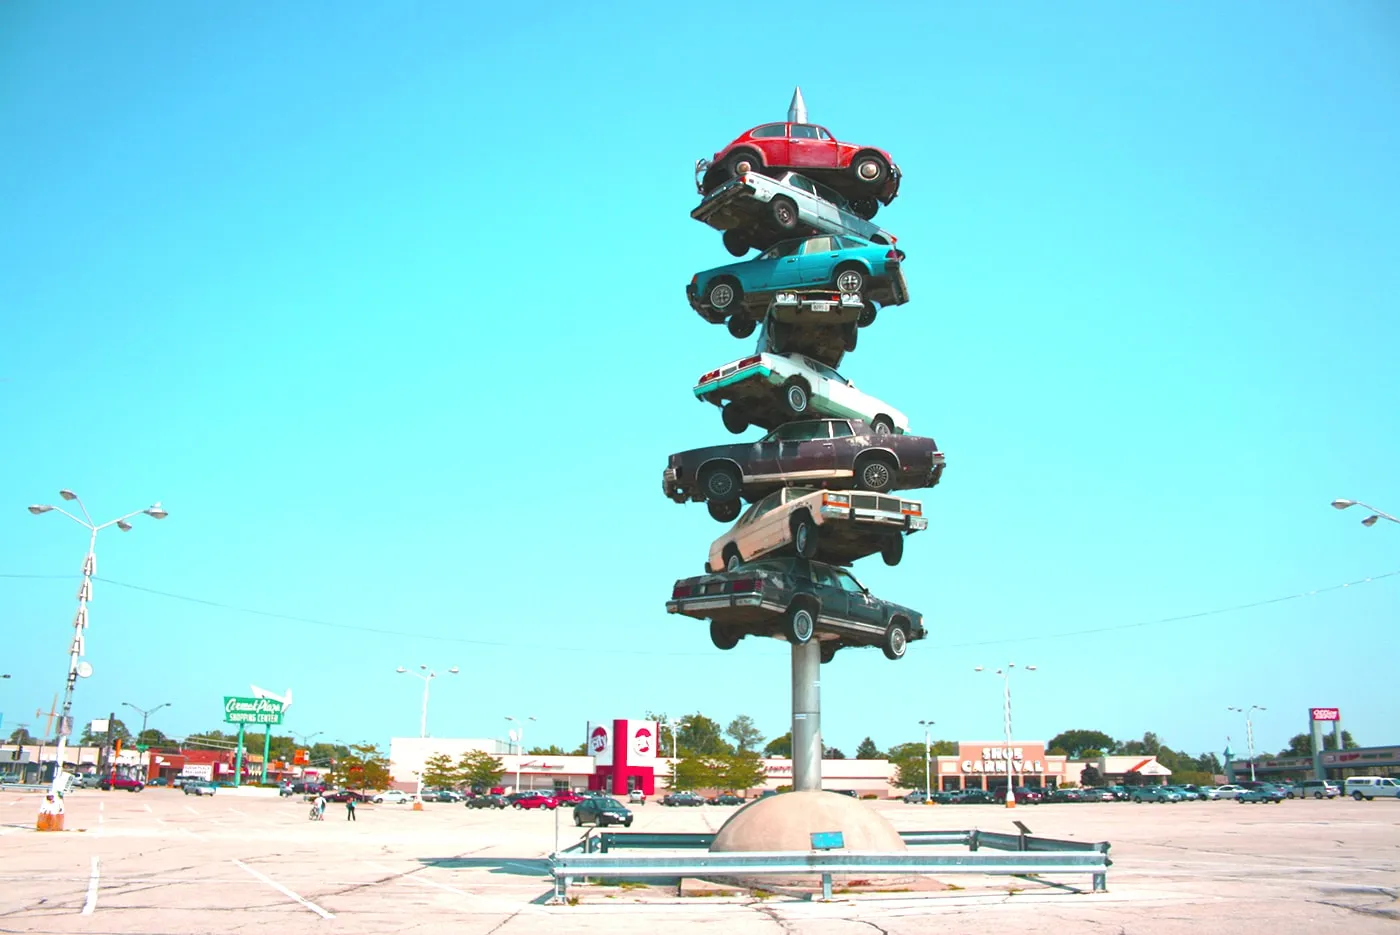 The Spindle in Berwyn, Illinois. Also known as cars on a spike or the car kabob. This roadside attraction was torn down in 2008.